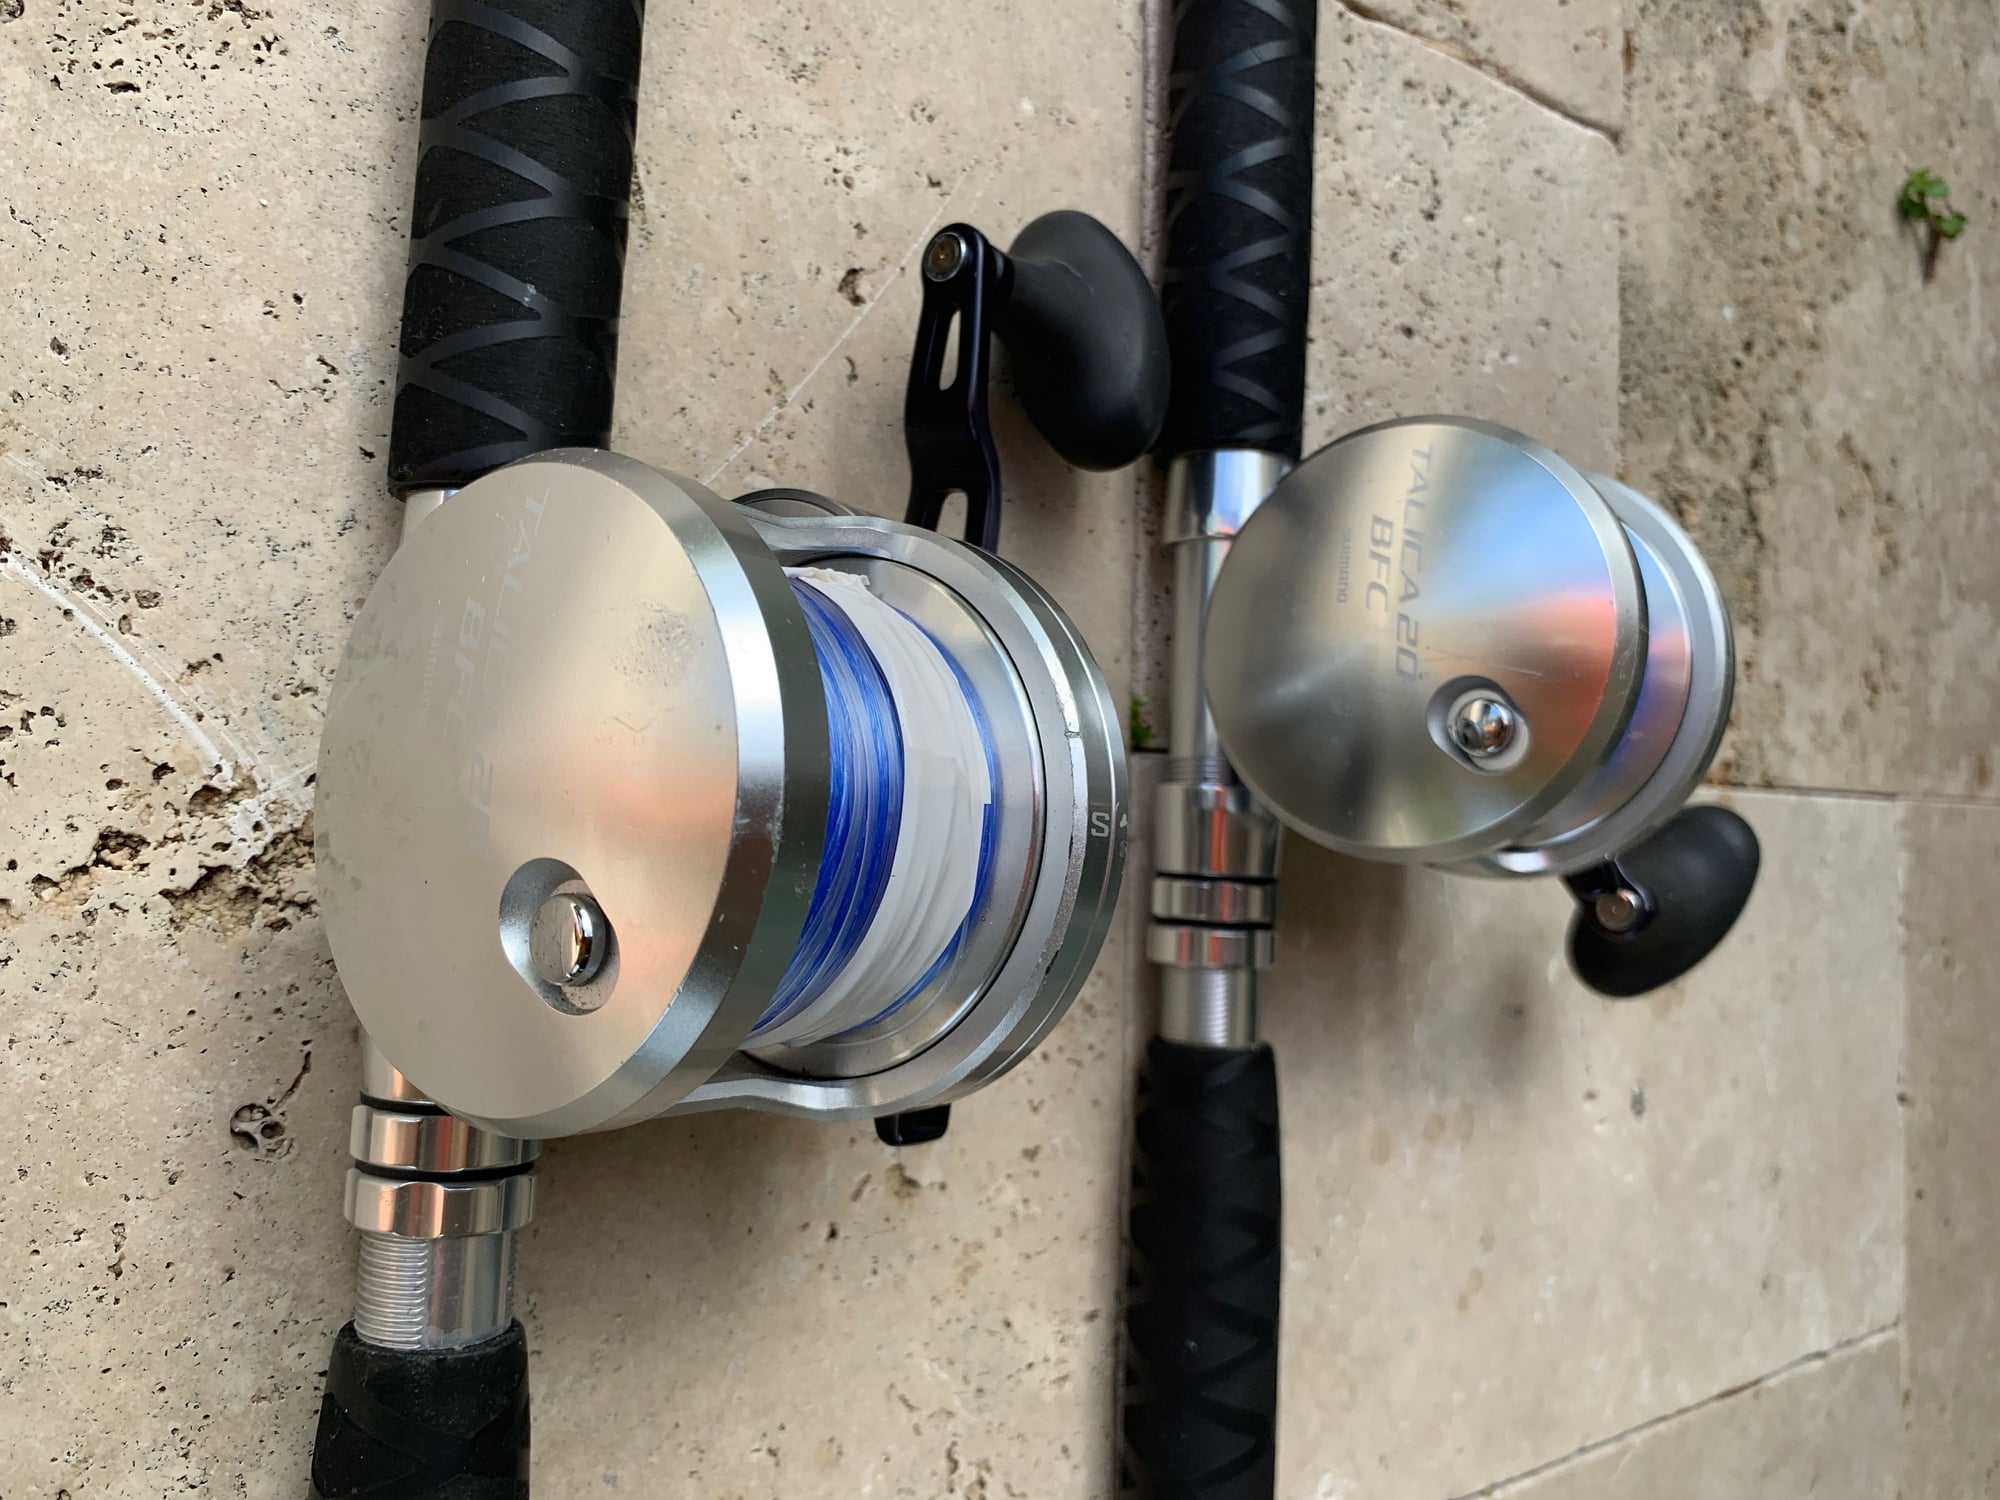 Live Bait Rods & Reels - Talica BFC, Okuma 16 SE, Avet LX G2, Penn FTH40NLD  & More - The Hull Truth - Boating and Fishing Forum